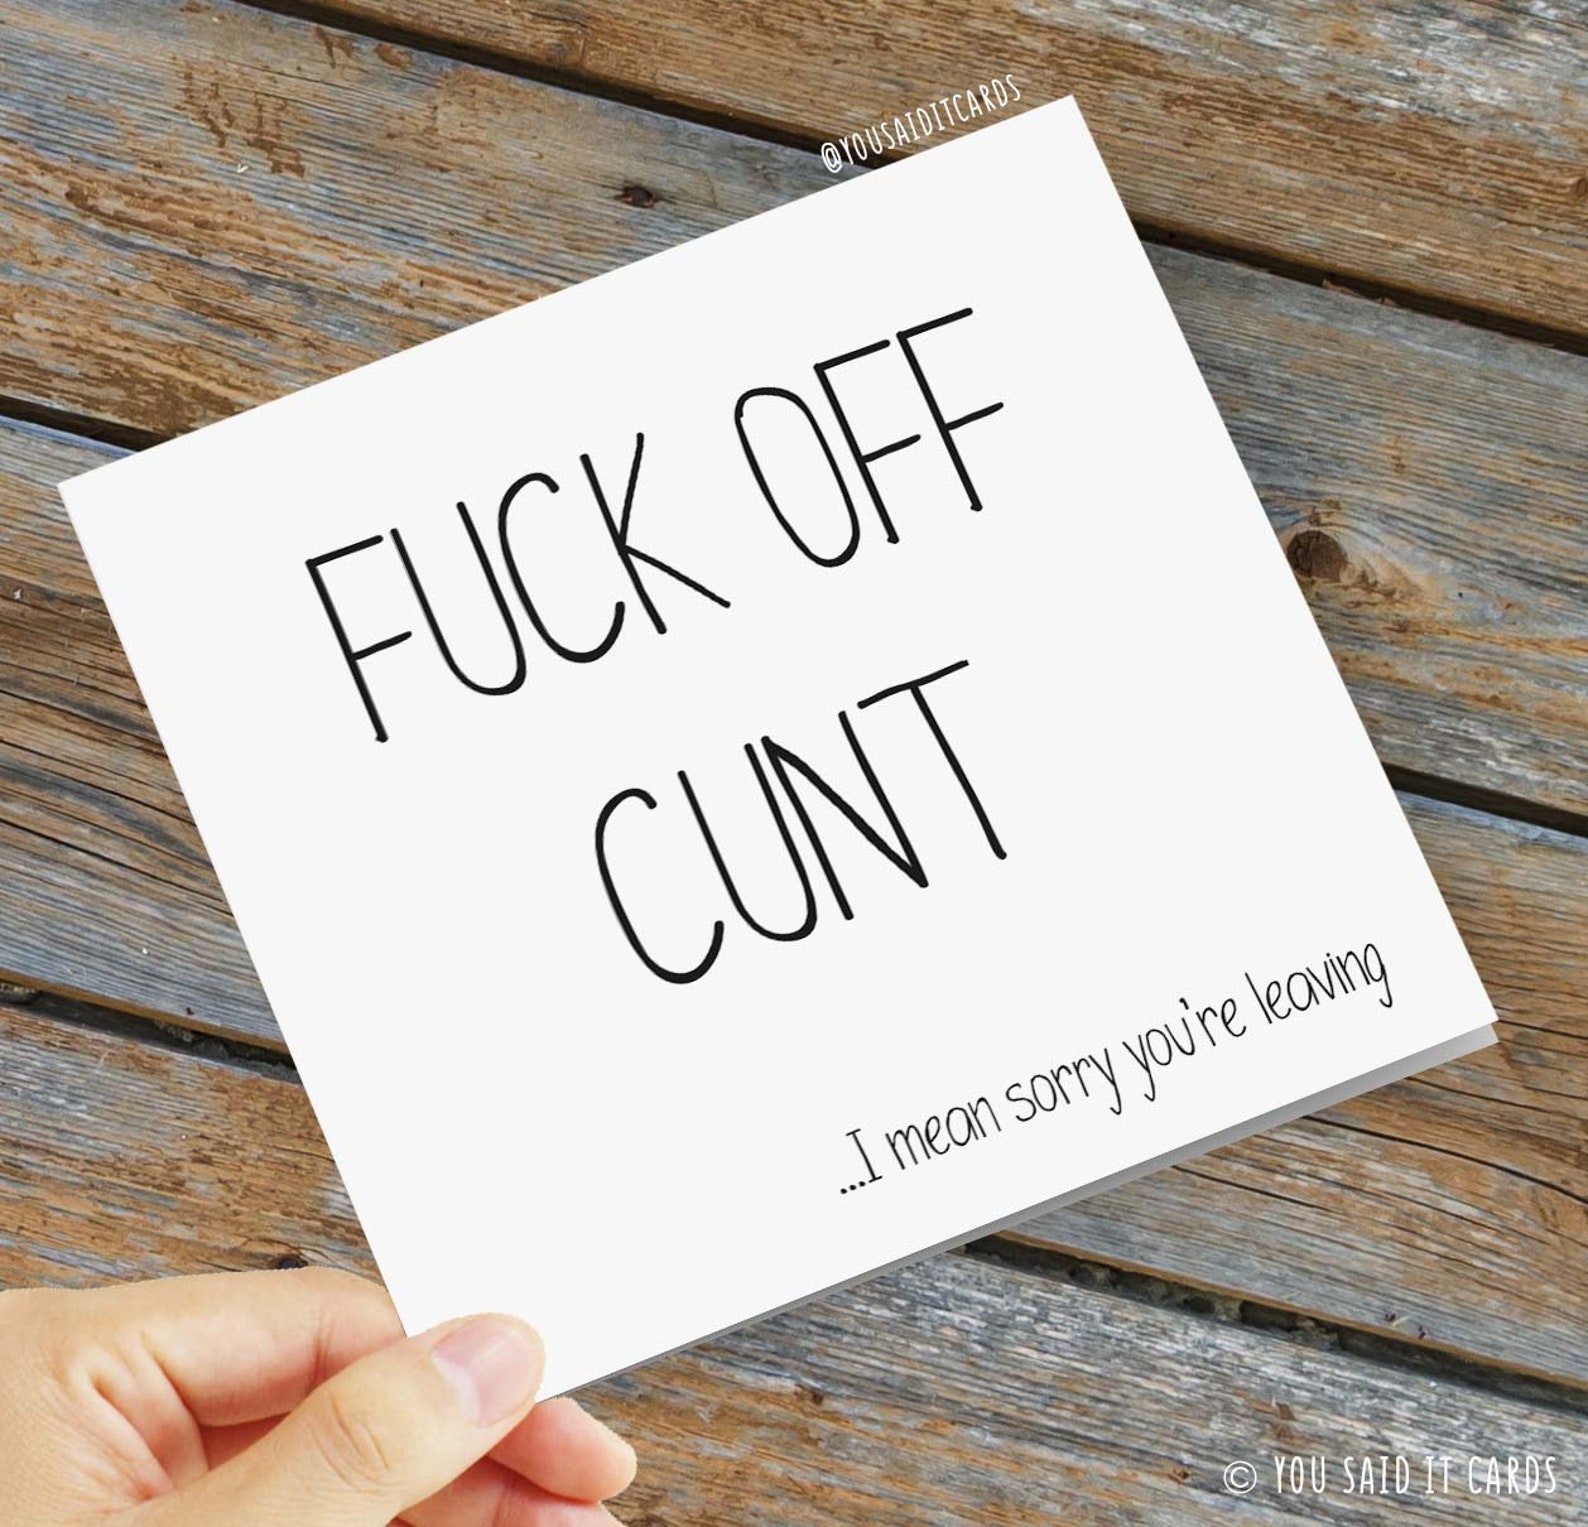 Funny Rude Offensive Leaving Cards Fuck Off Cunt I Mean Etsy